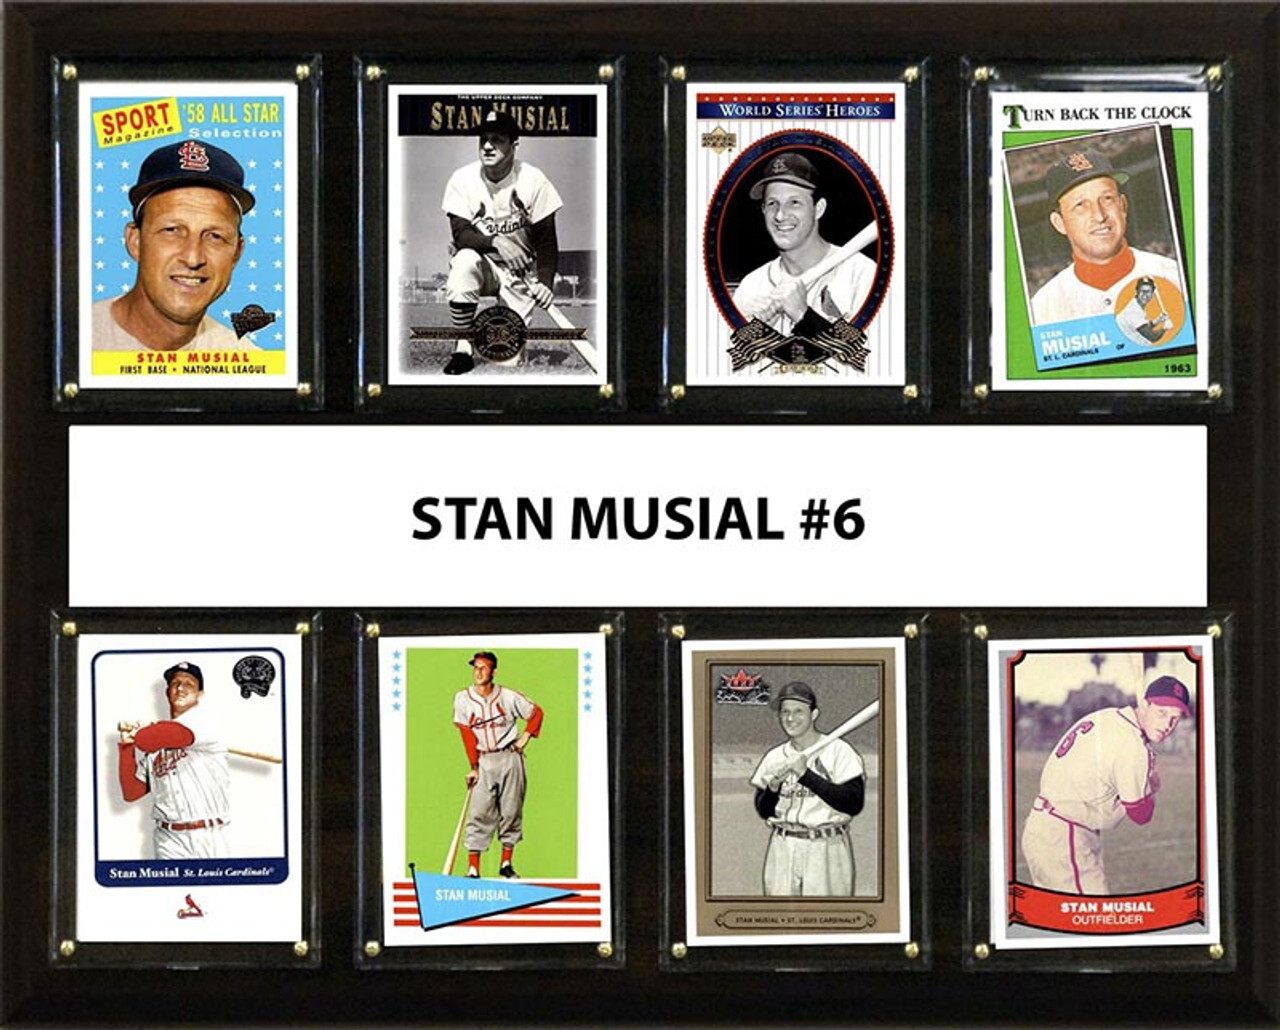 Stan Musial Autographed Cardinals Jersey in Shadow Box